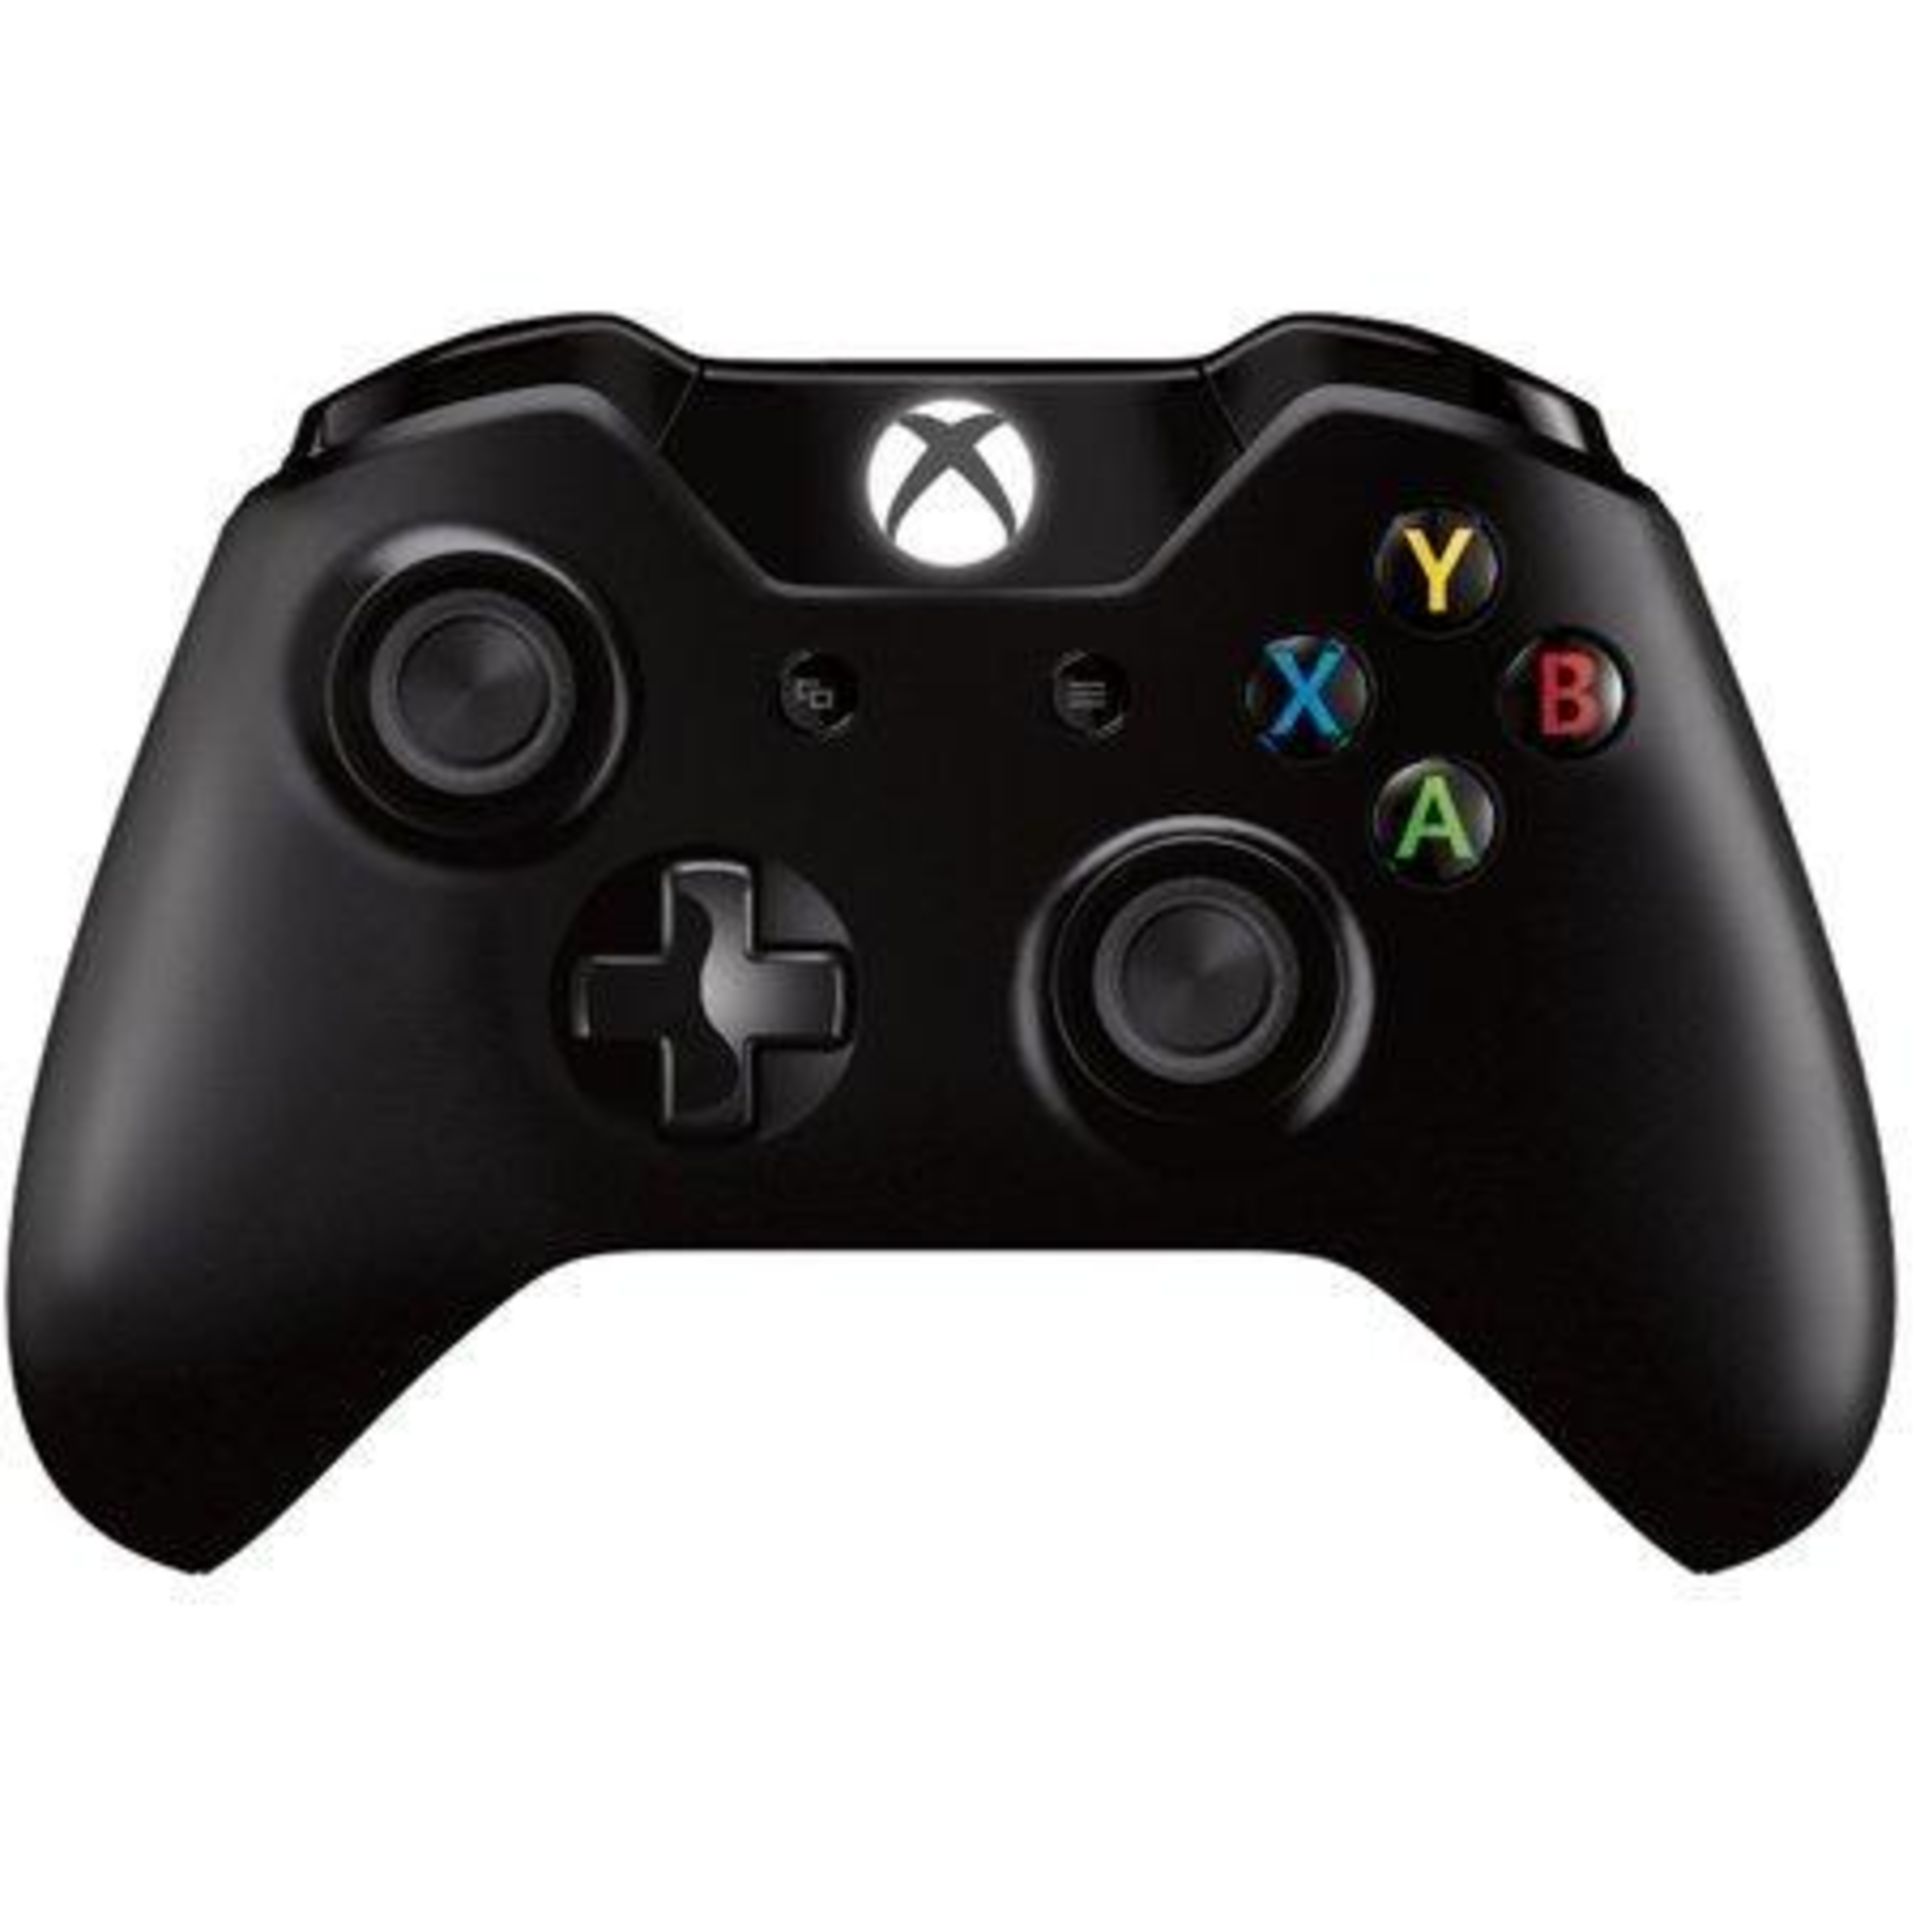 Official Xbox One Wireless Controller - Black 619/9582 £49.99 RRP